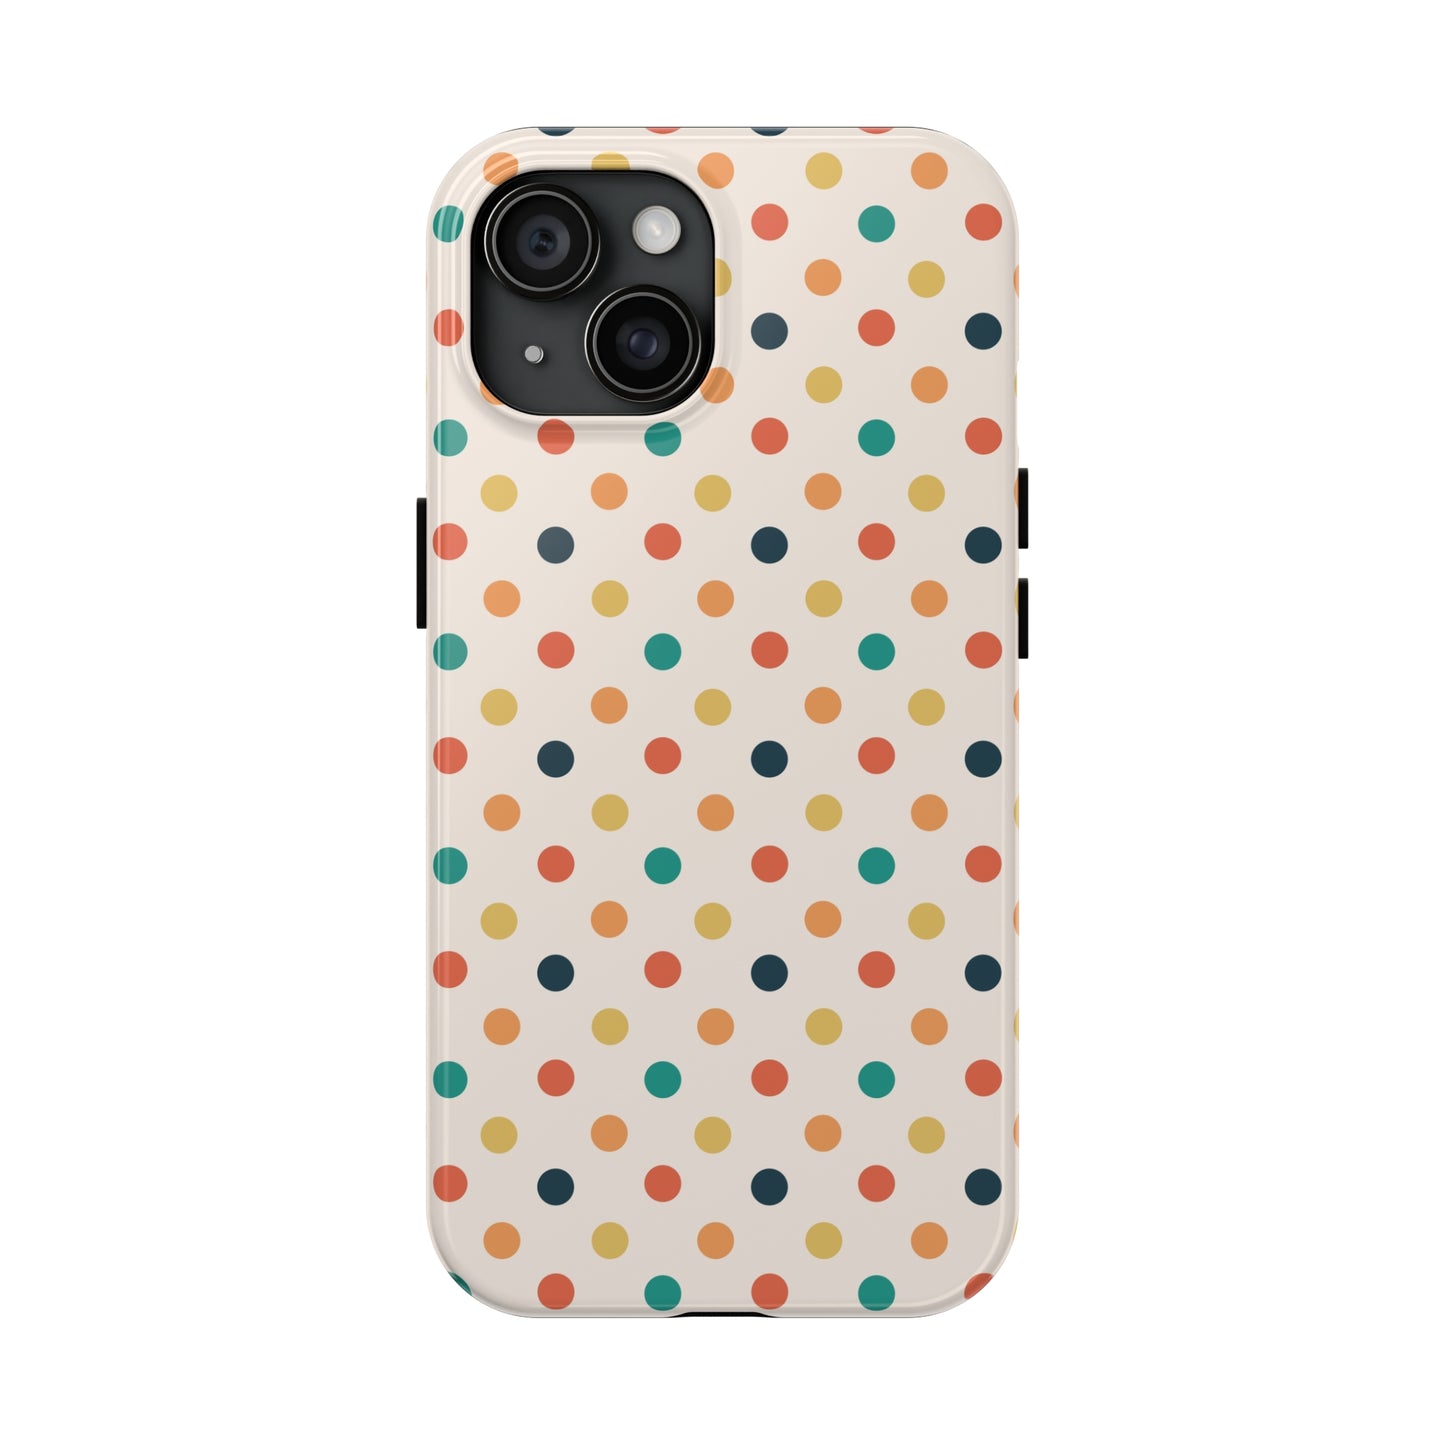 Sunbaked Polka Dots Tough Phone Cases, Case-Mate